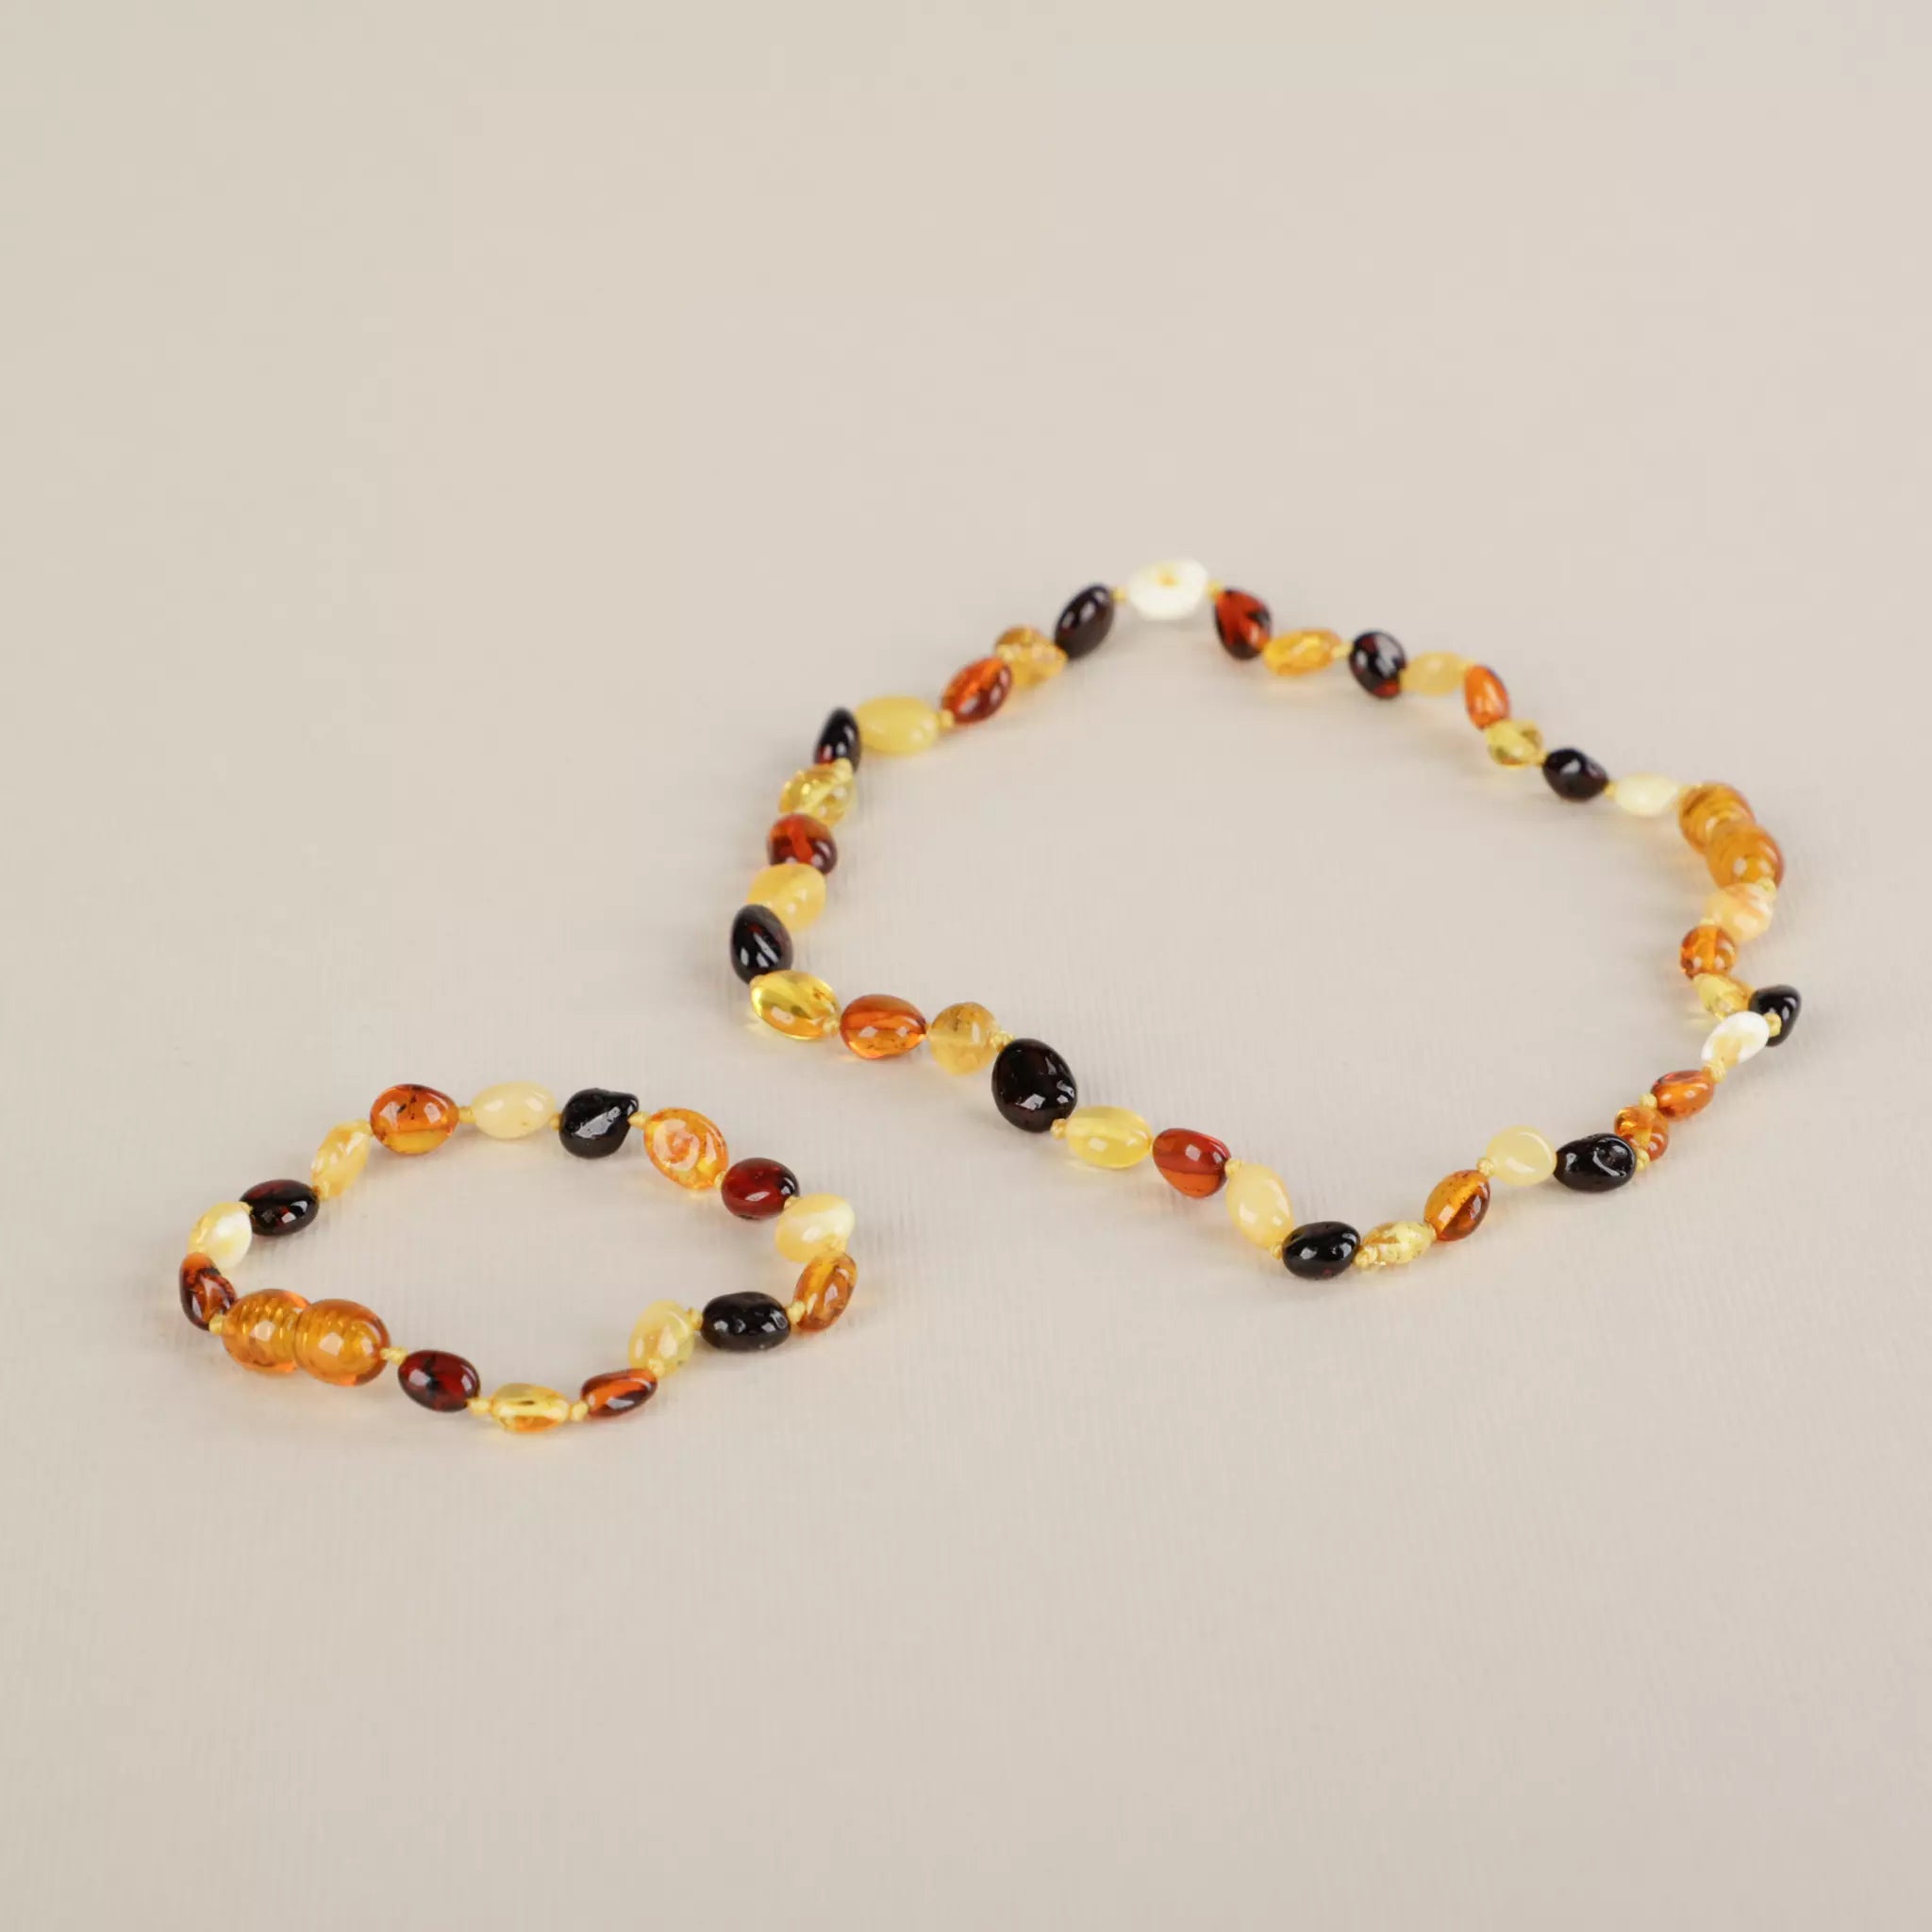 Baltic Amber Teething Necklace For Baby Size 14-35cm - Gift Box - 4 Colors  - Necklaces - AliExpress